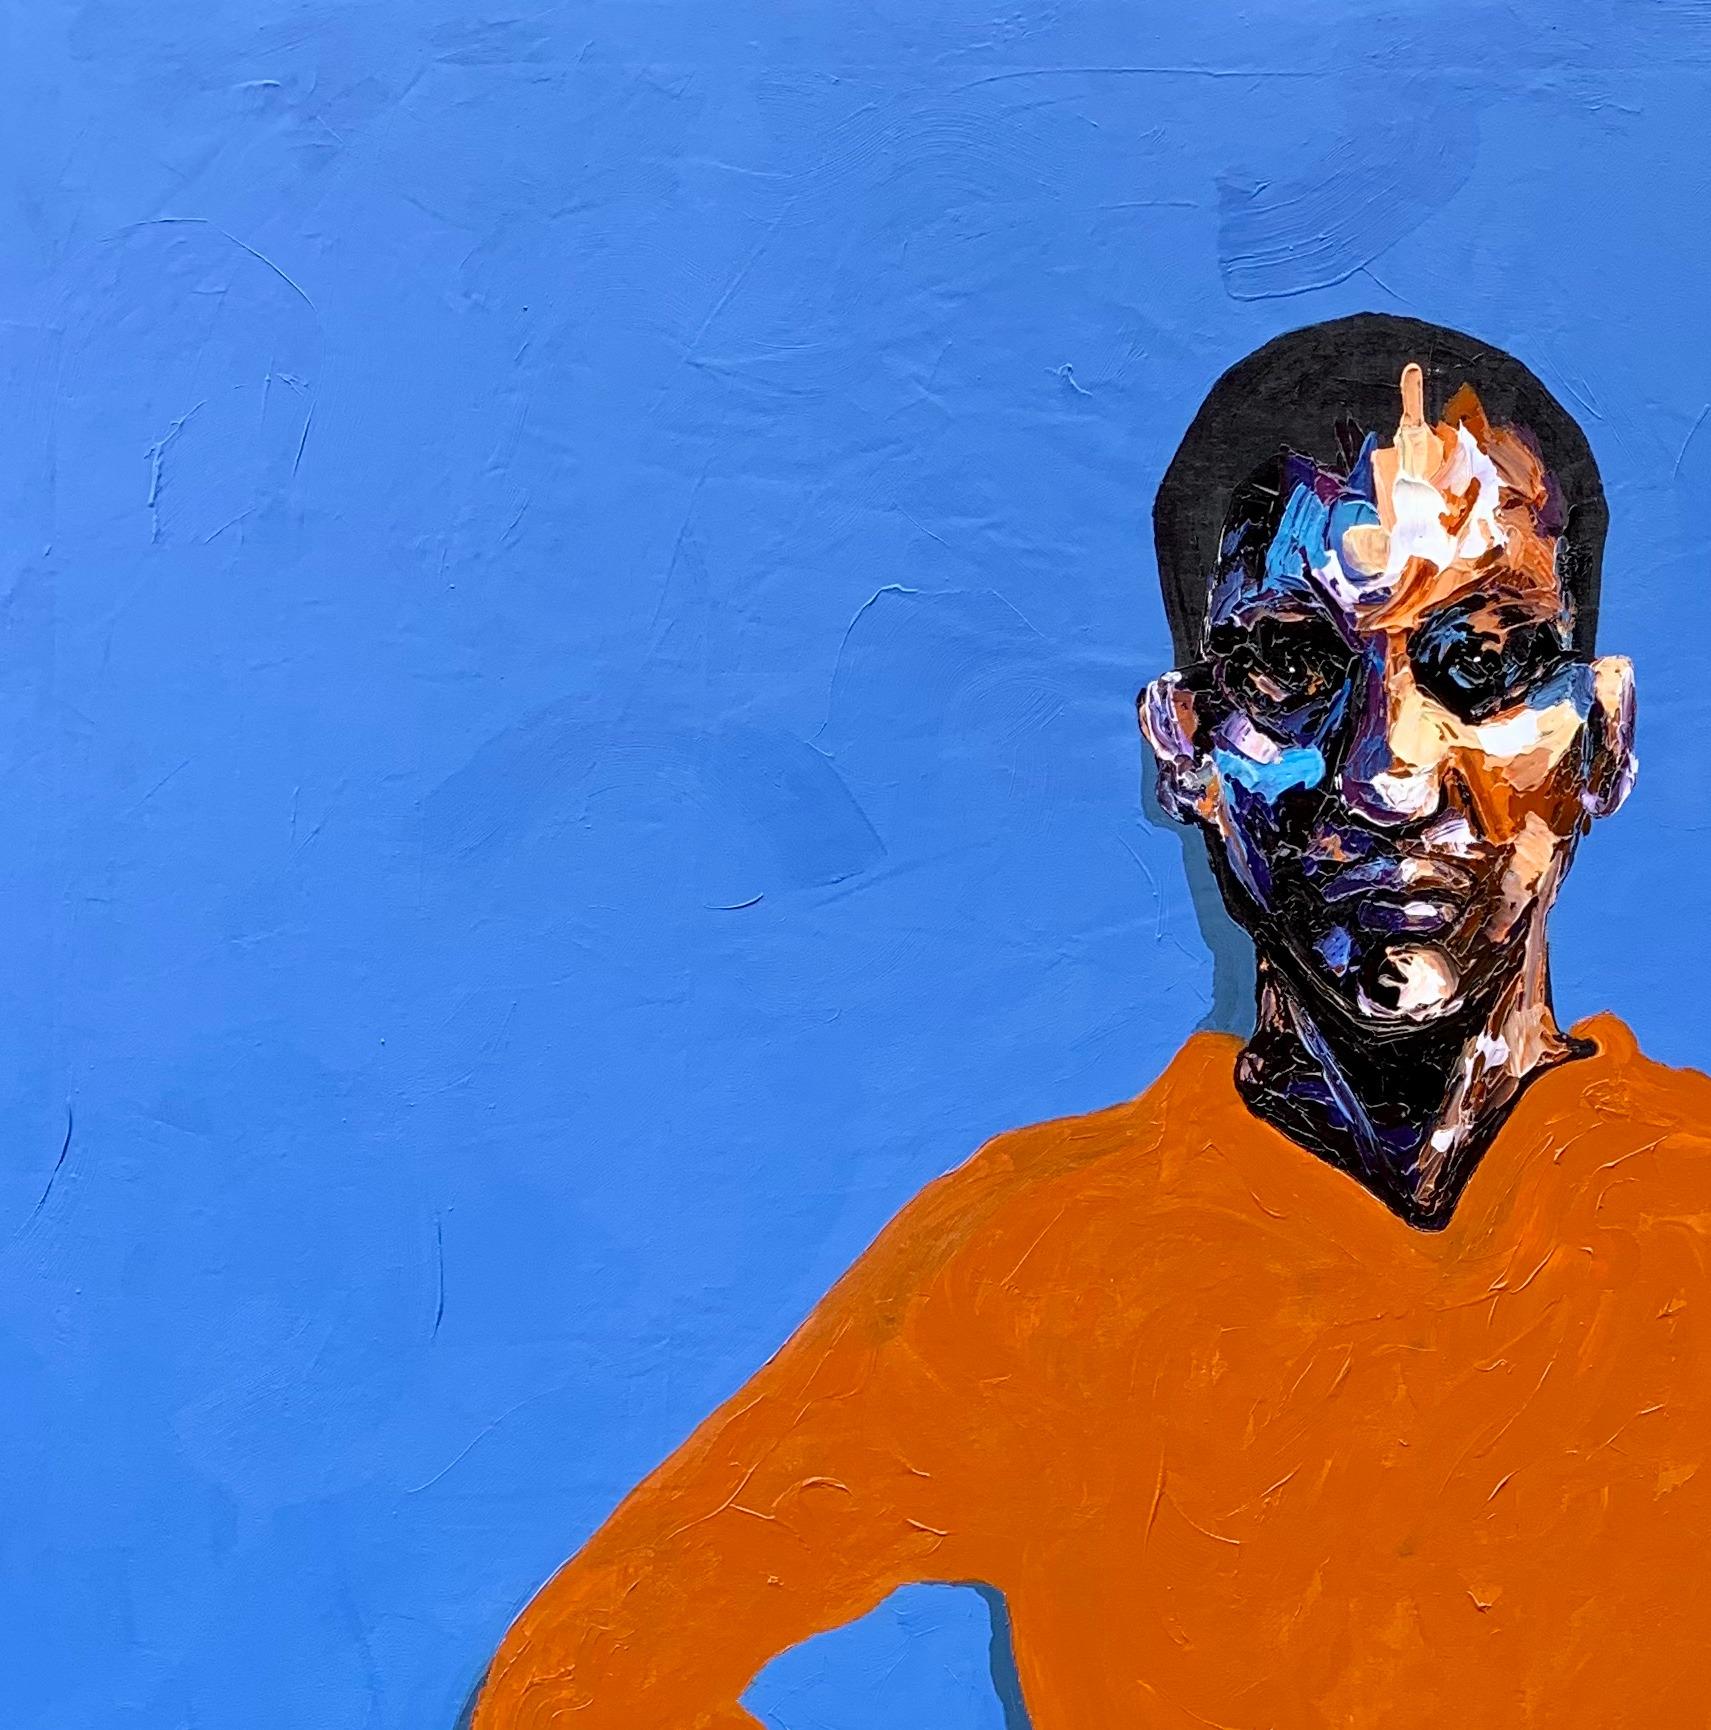 Victim (When The Sky Seems So Blue) - Painting by Oluwaseun Akinlo